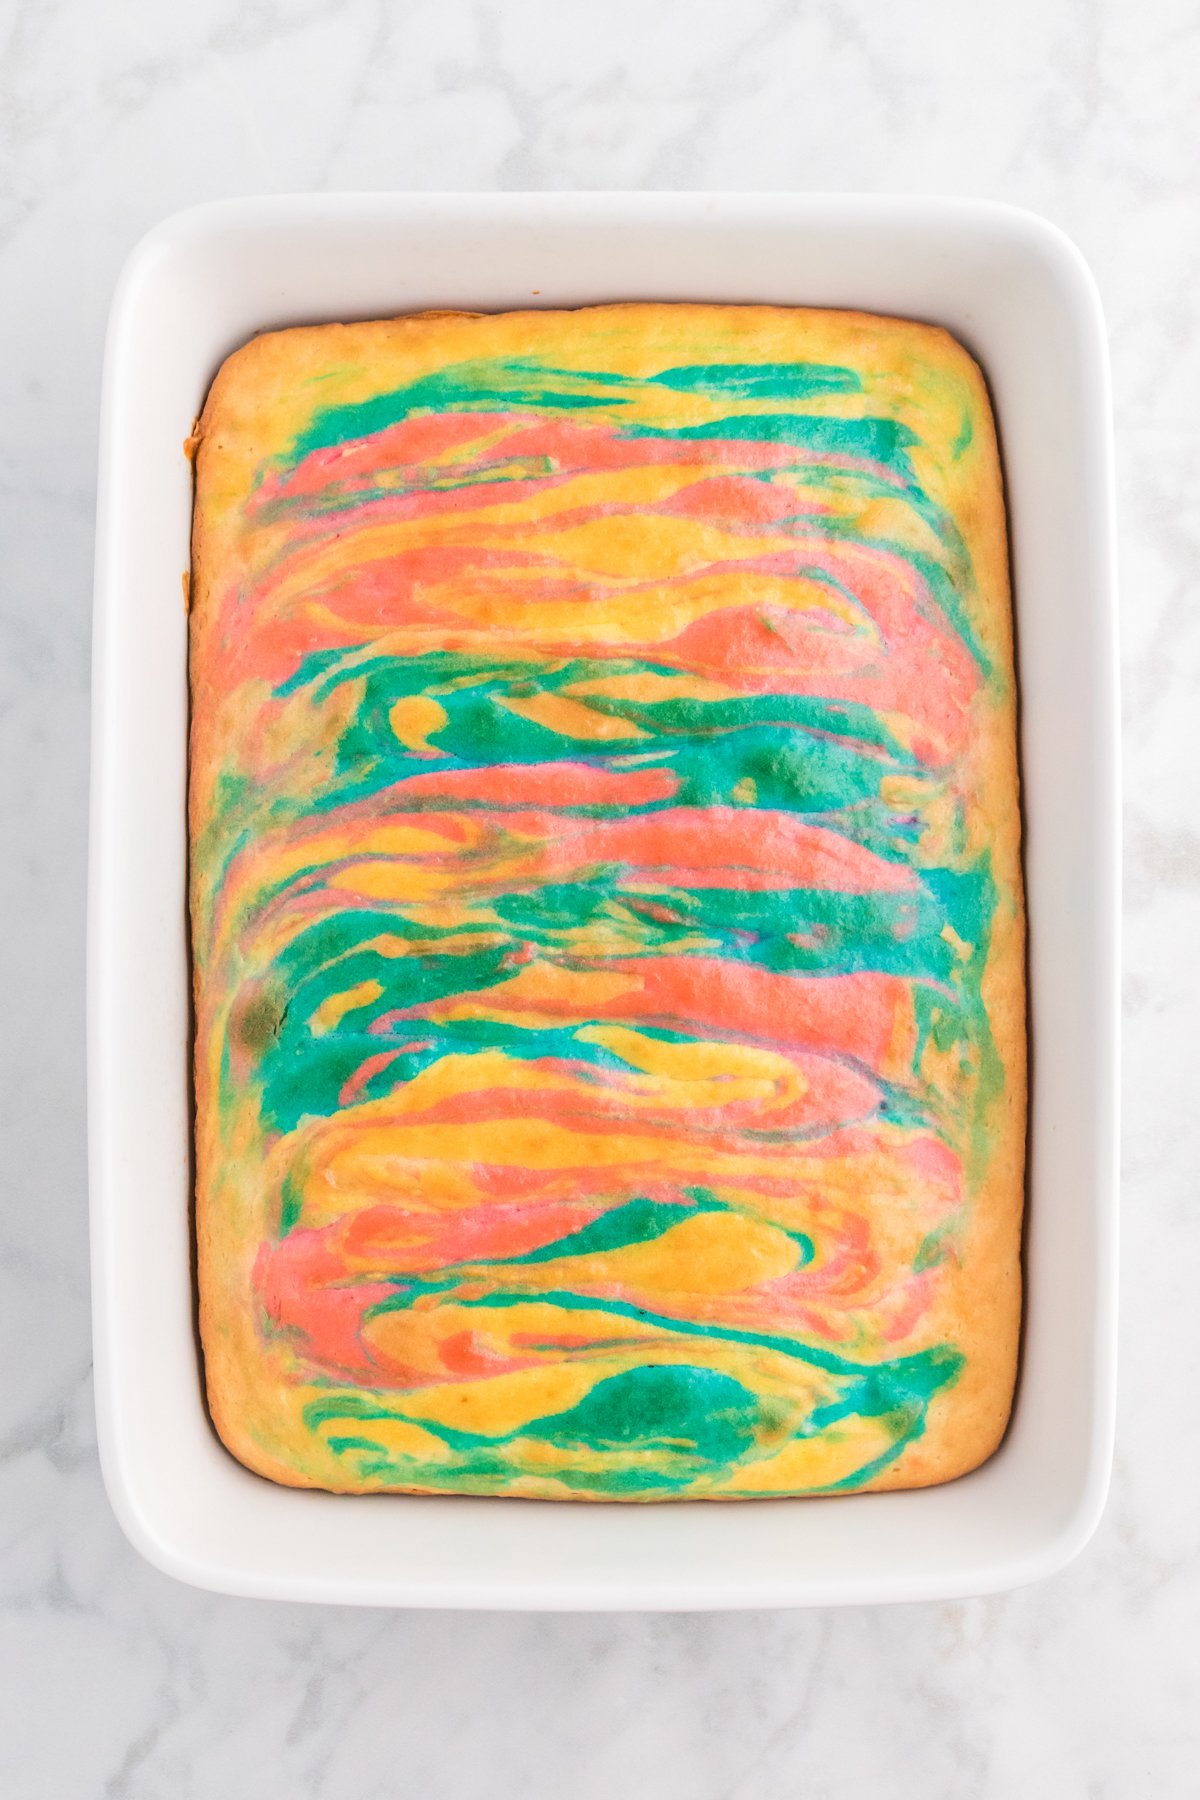 swirled Easter cake cooling in a baking dish